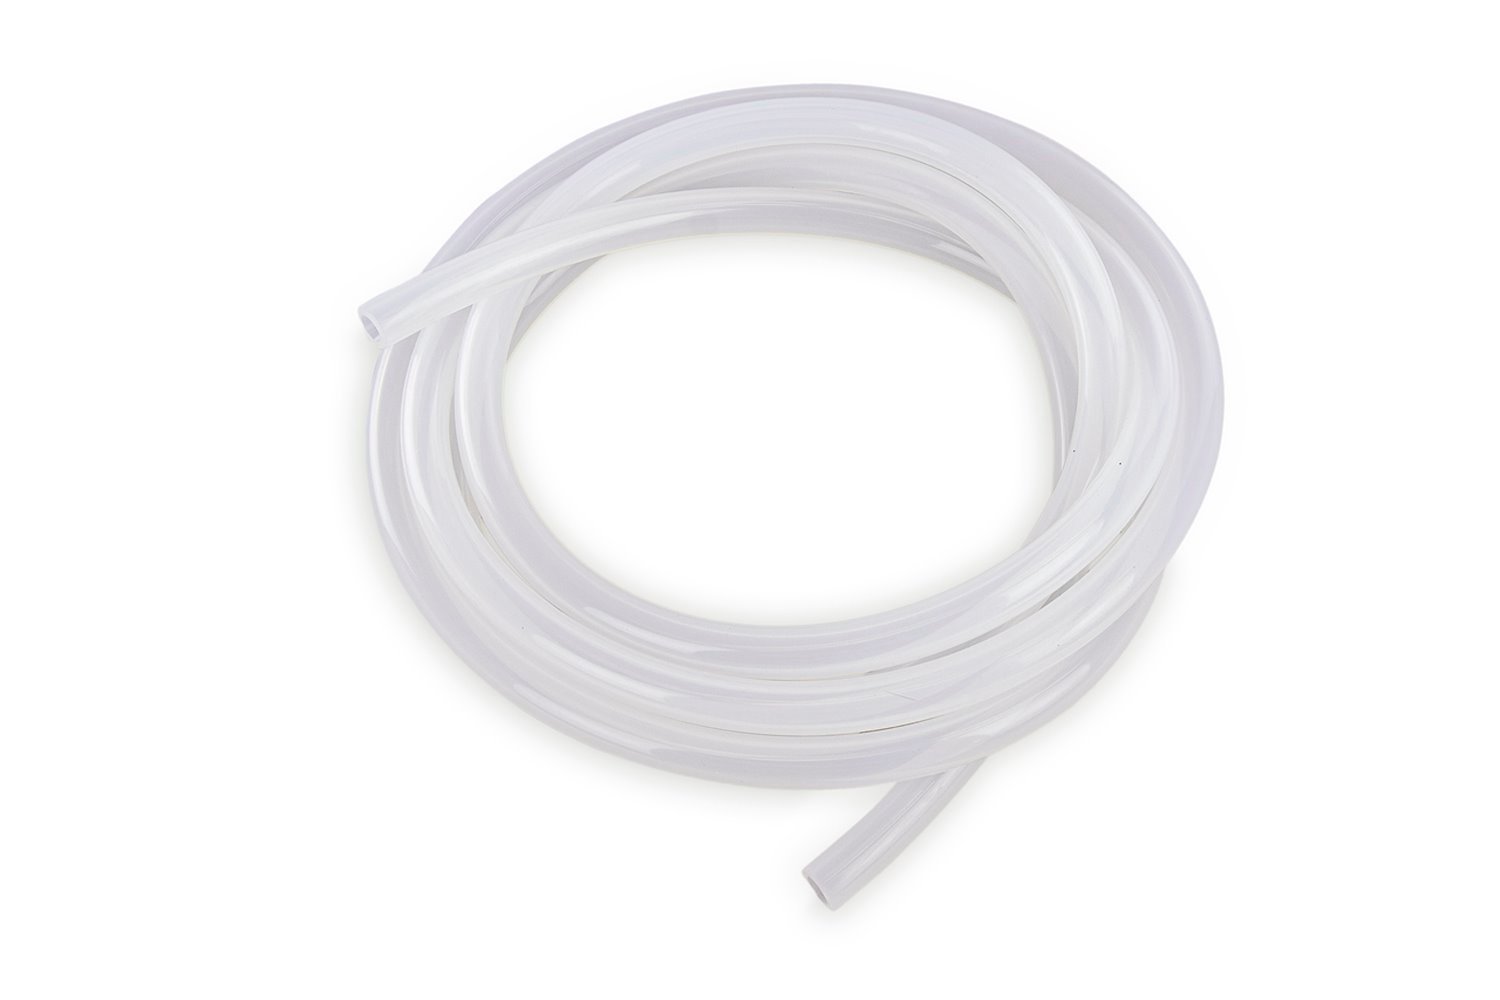 HTSVH3TW-CLEARx10 High-Temperature Silicone Vacuum Hose Tubing, 1/8 in. ID, 10 ft. Roll, Clear